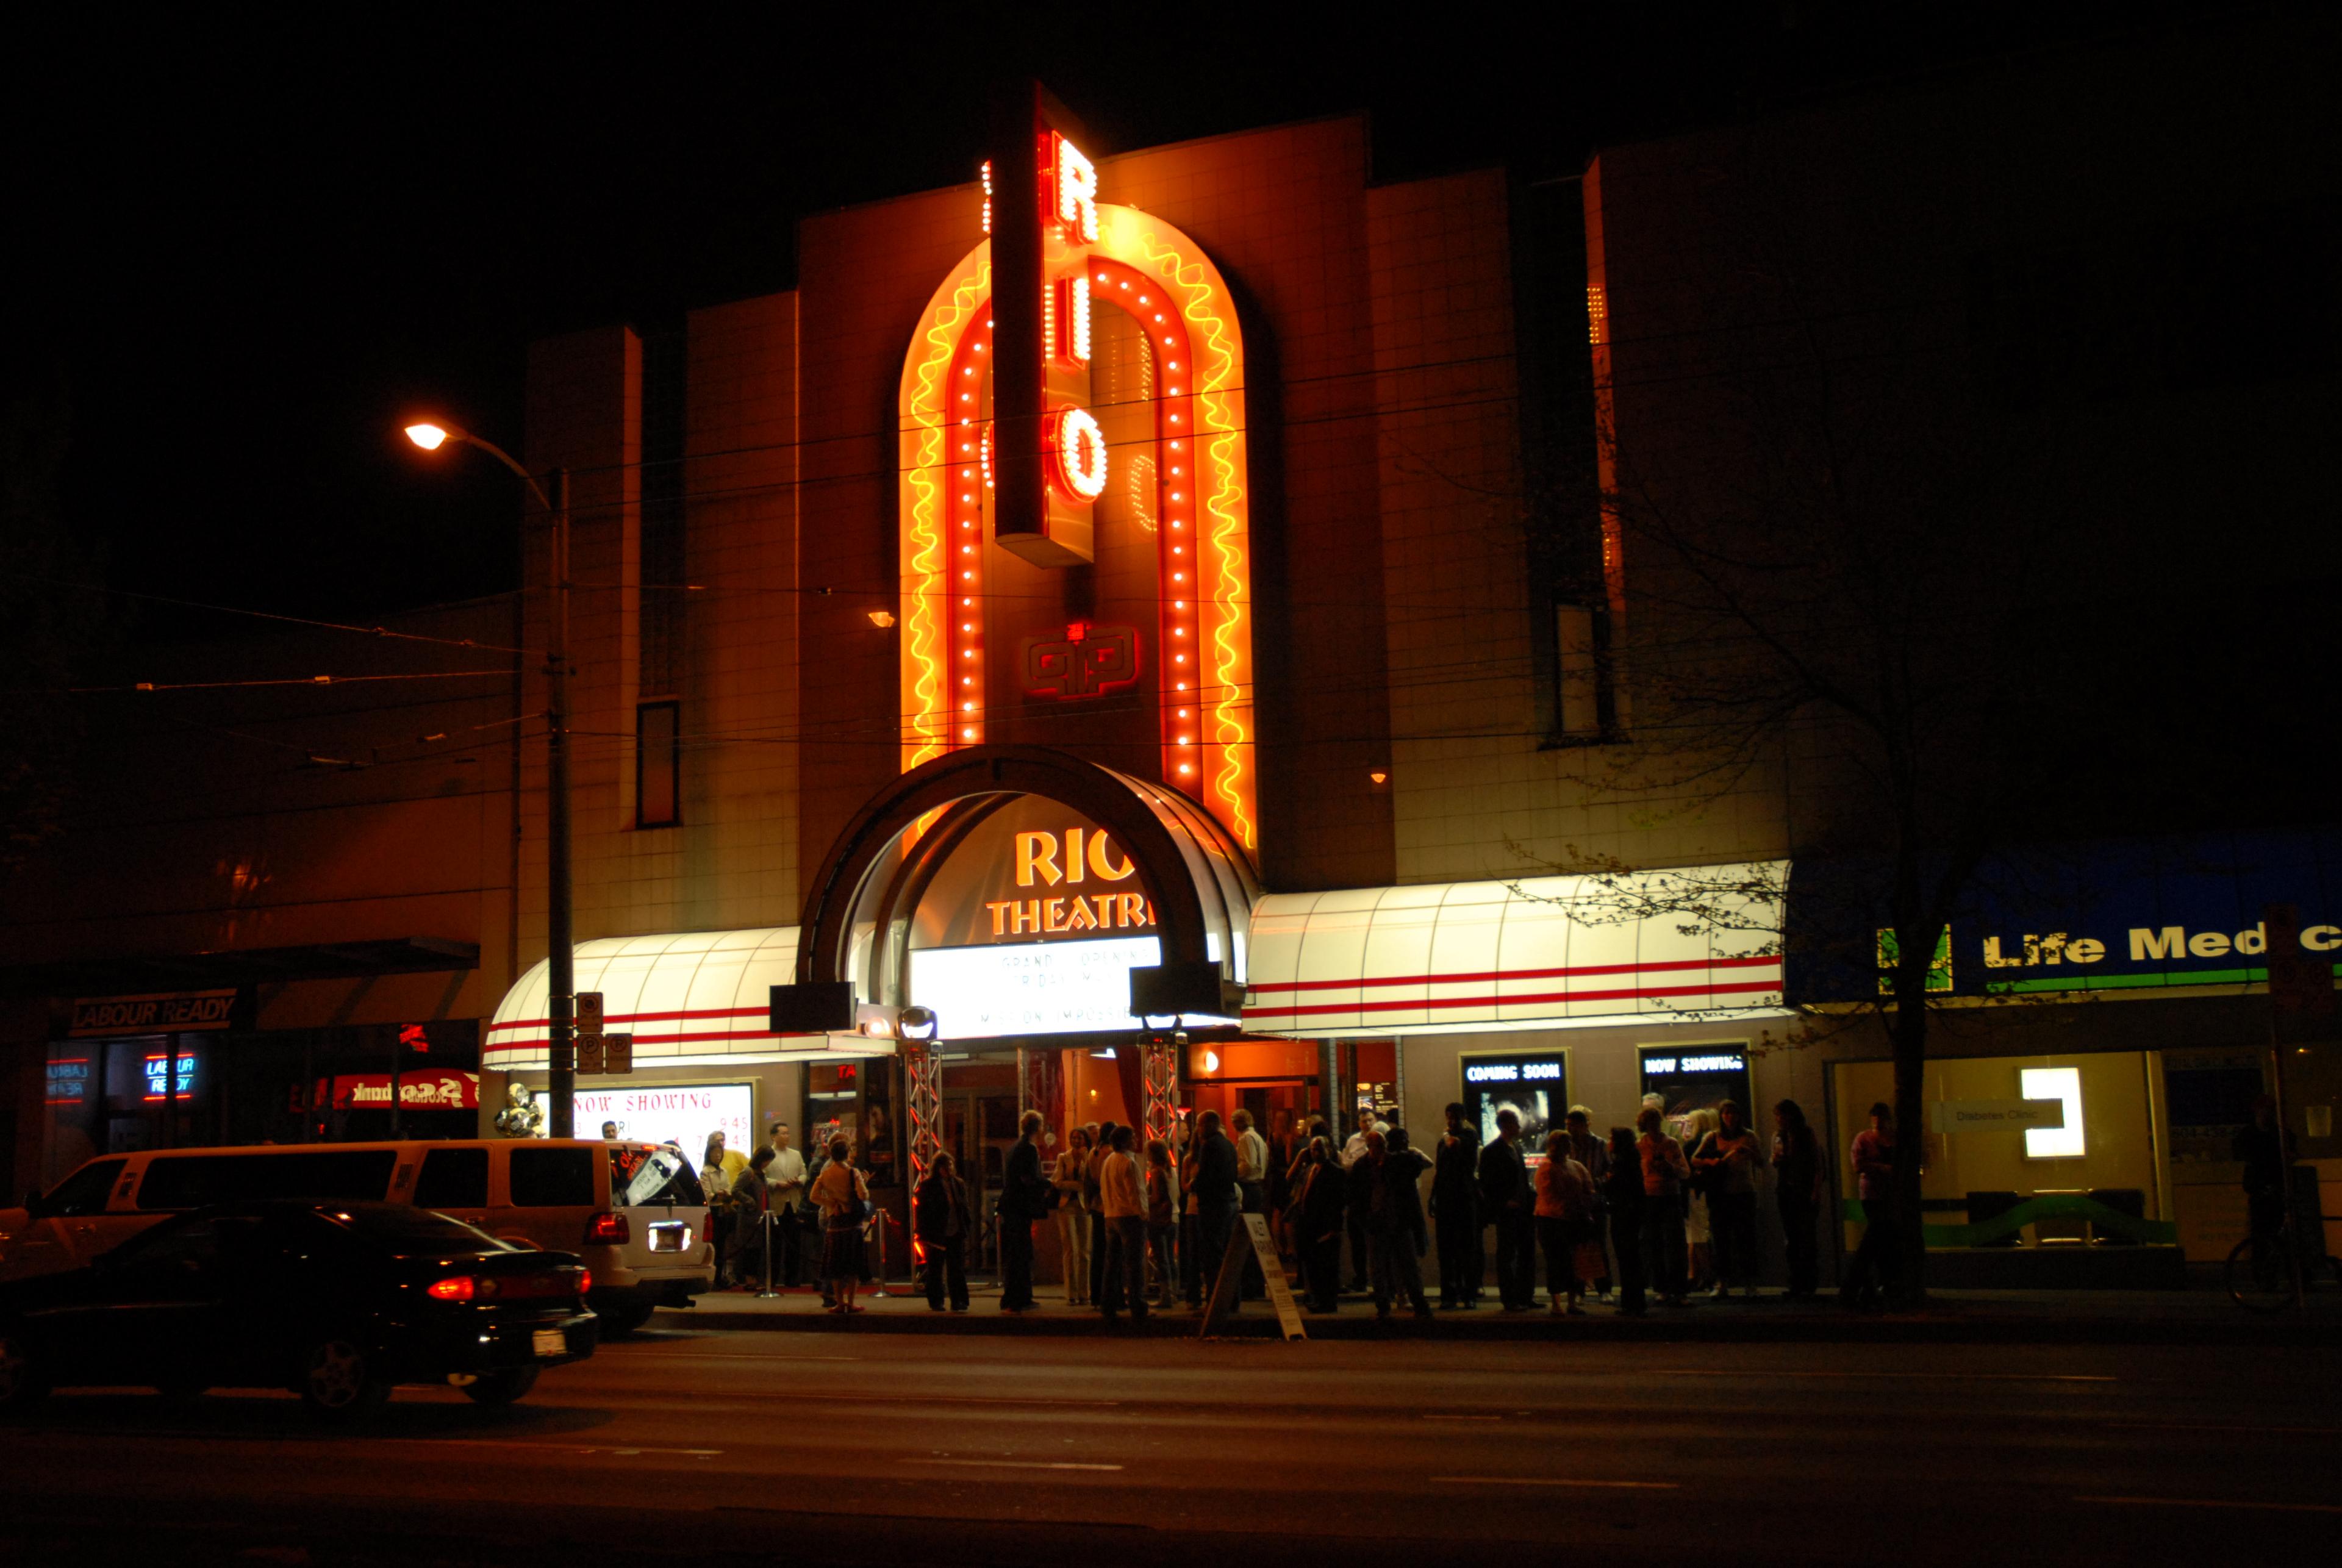 Cover image of this place The Rio Theatre